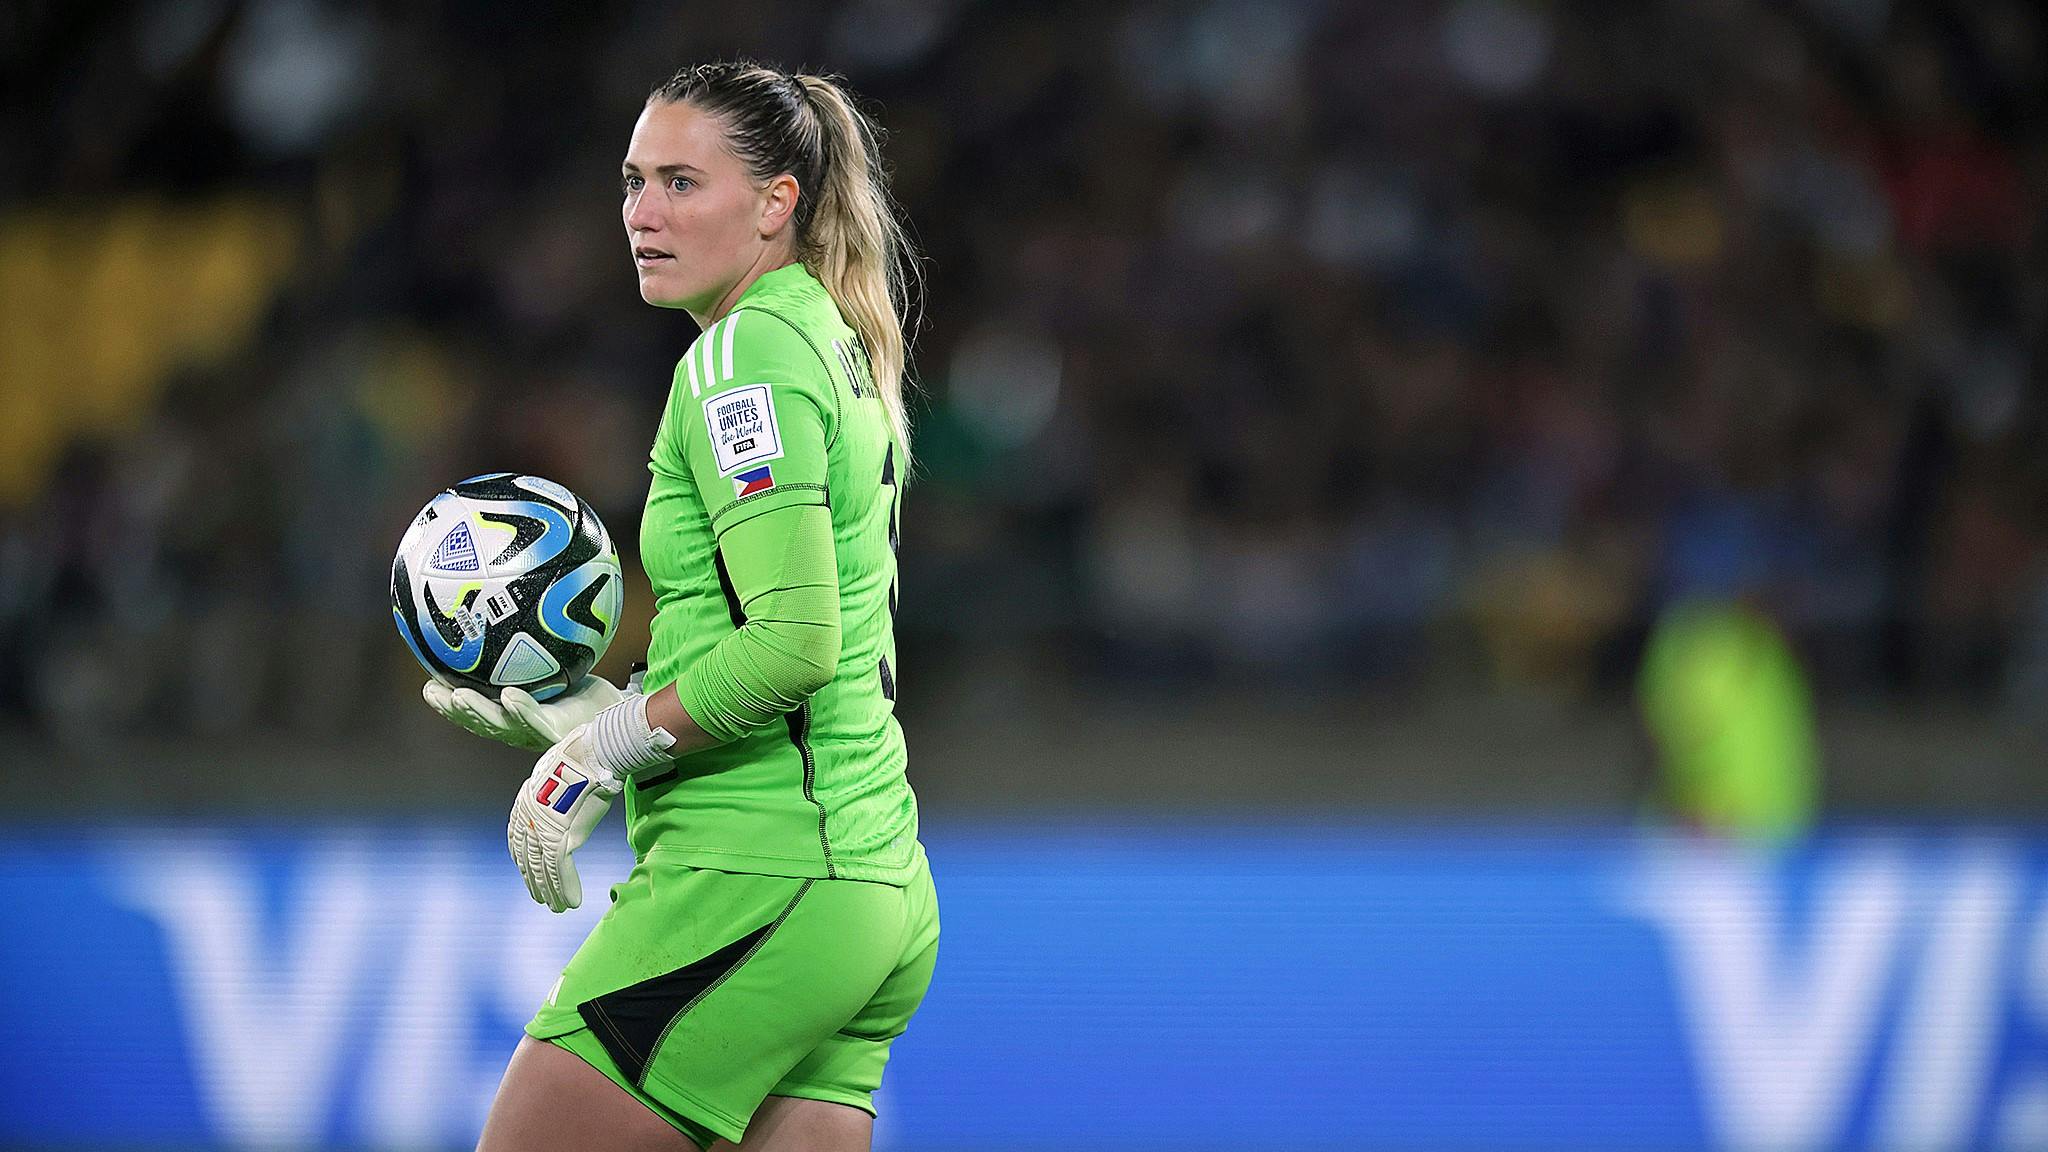 Olivia McDaniel’s inclusion in elite list cements her awesome FIFA Women